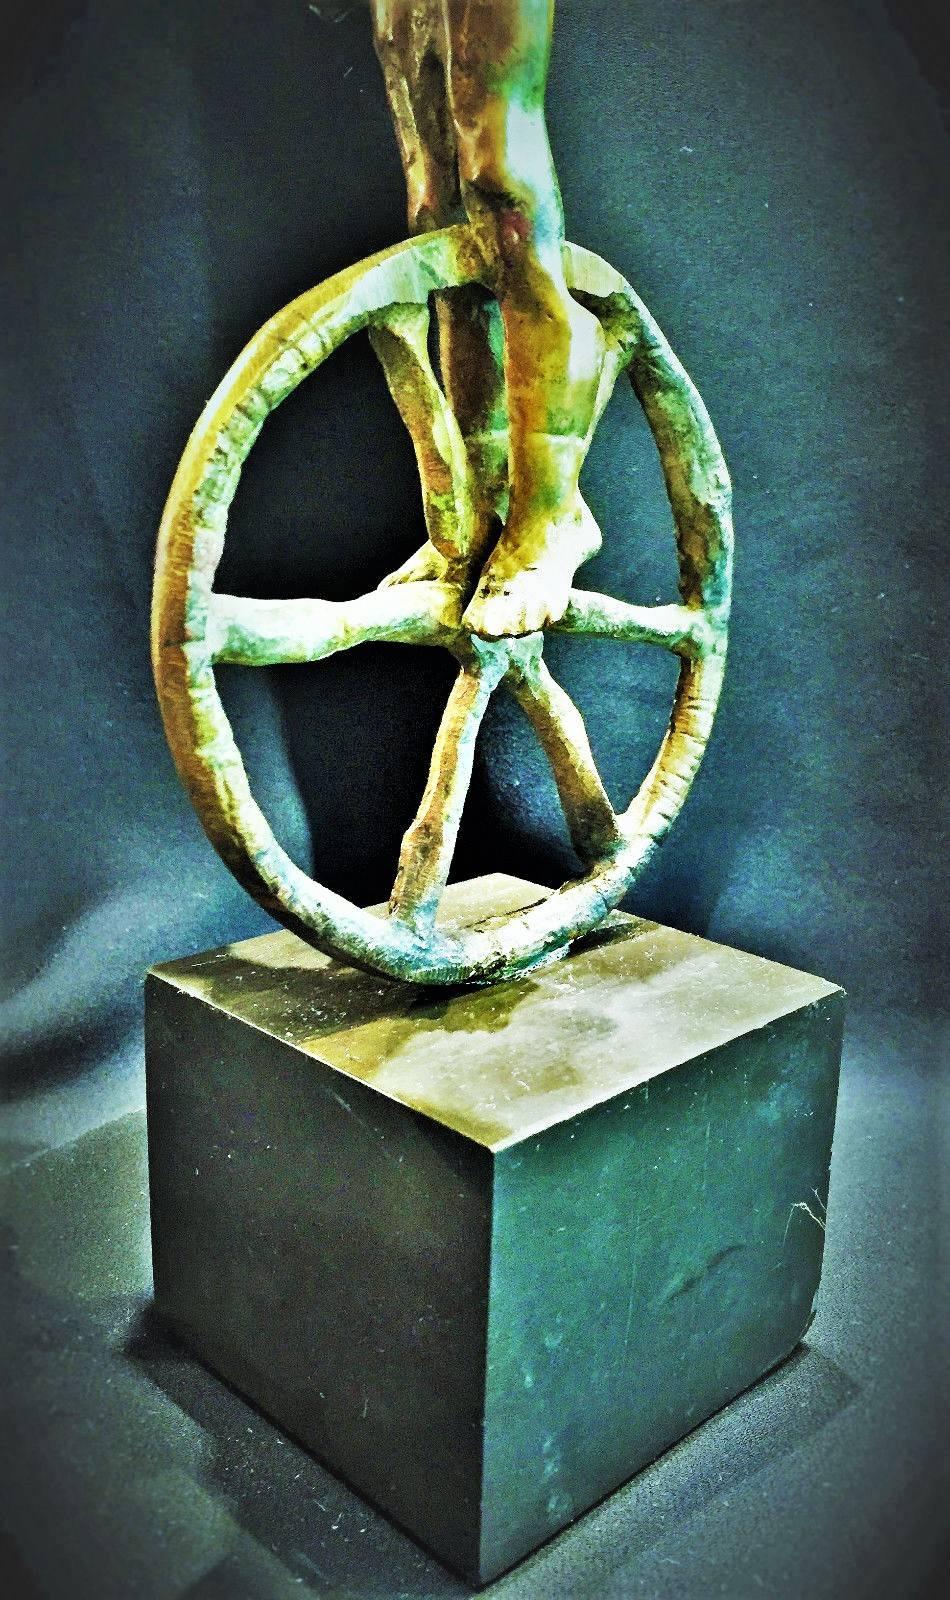 Late 20th Century Whimsical Unicycle Rider, Contemporary Surrealistic Bronze Sculpture circa 1980s